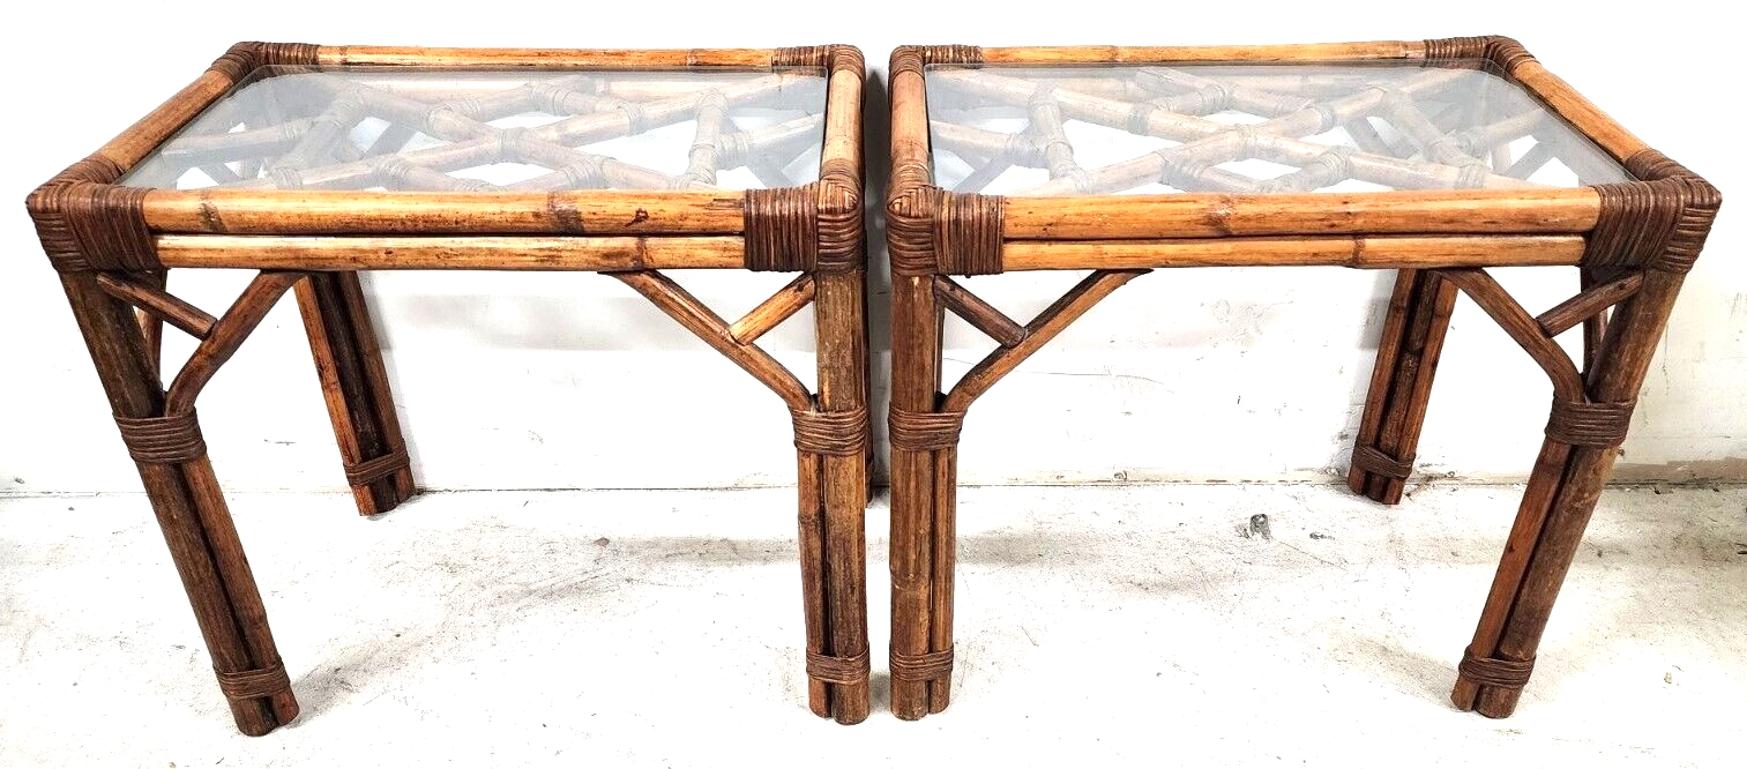 For FULL item description be sure to click on CONTINUE READING at the bottom of this listing.


Offering one of our recent Palm Beach Estate fine furniture acquisitions of a.
Pair of Vintage 1960s French bamboo rattan glass side tables. 

This